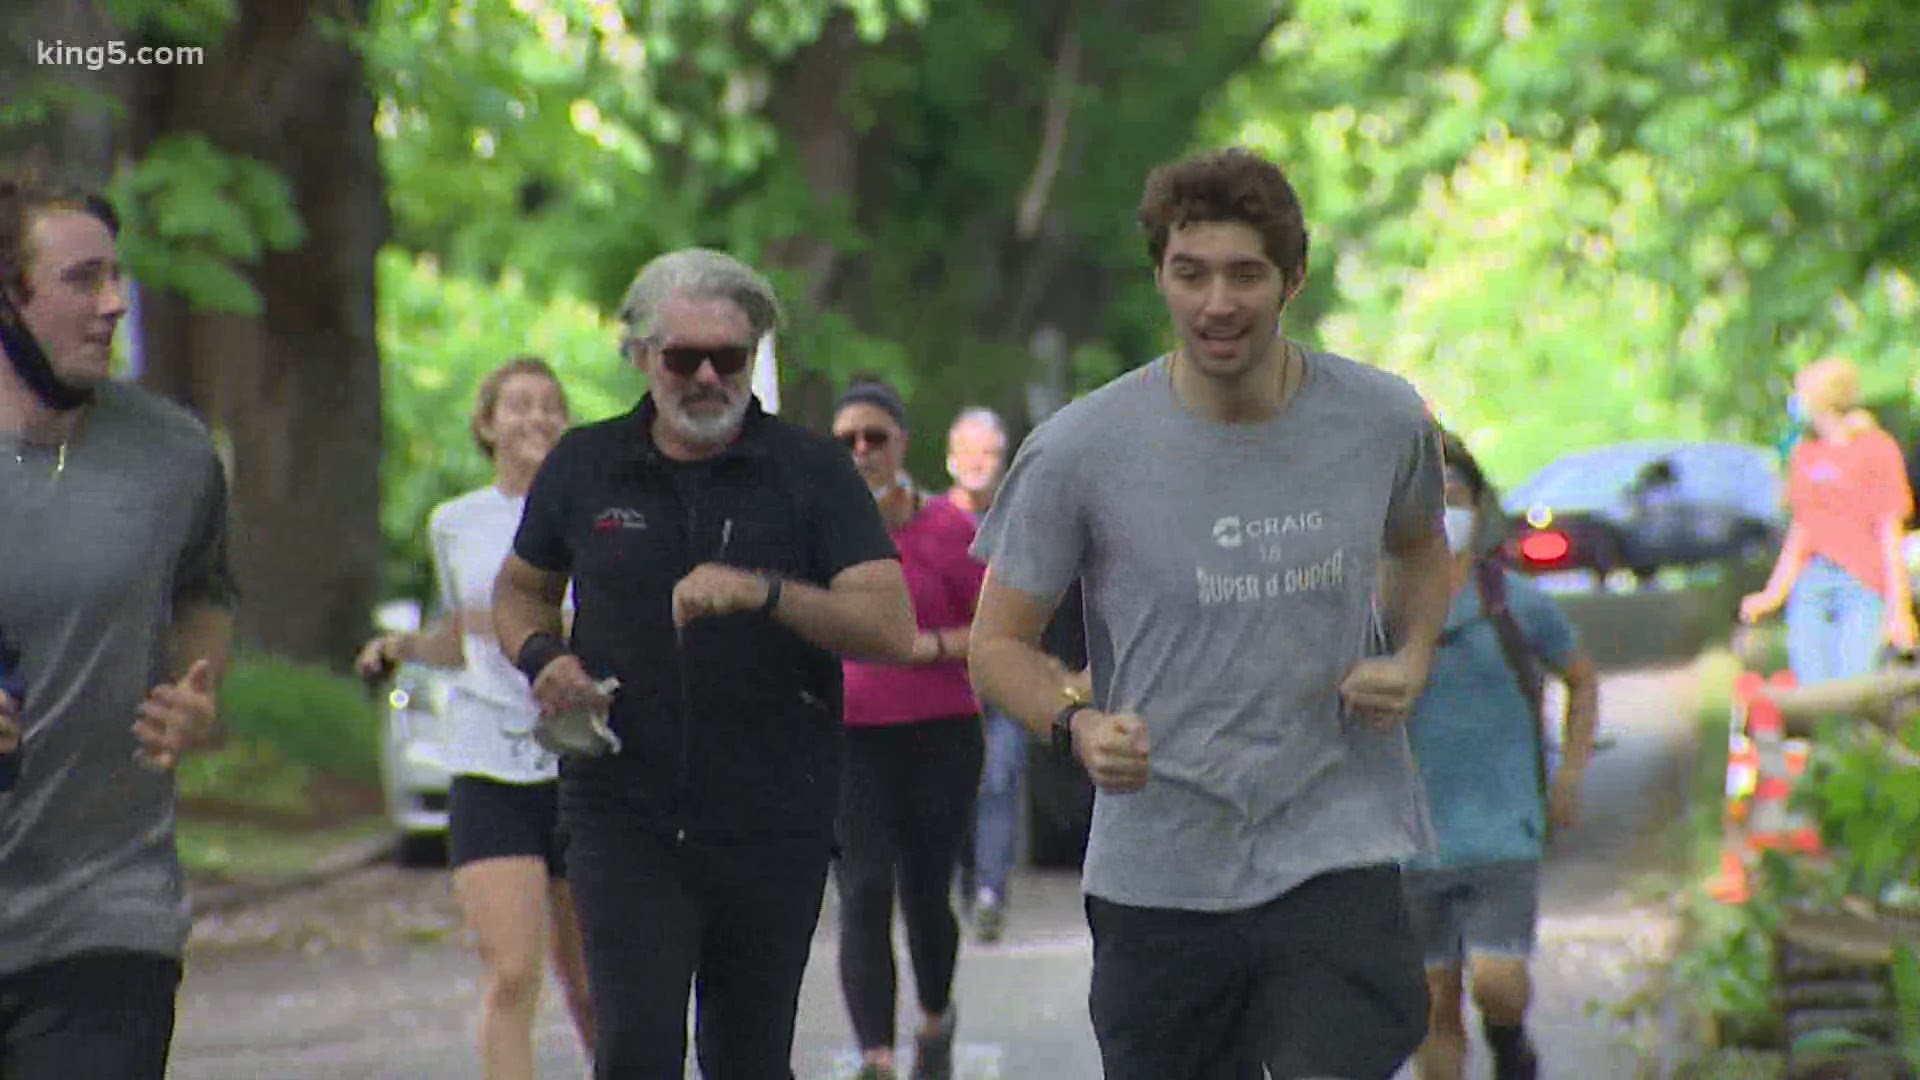 Doctors said Aidan Ryker Schellings might not walk again after a skateboard crash at Green Lake. One year after his accident, he ran a mile to celebrate his recovery